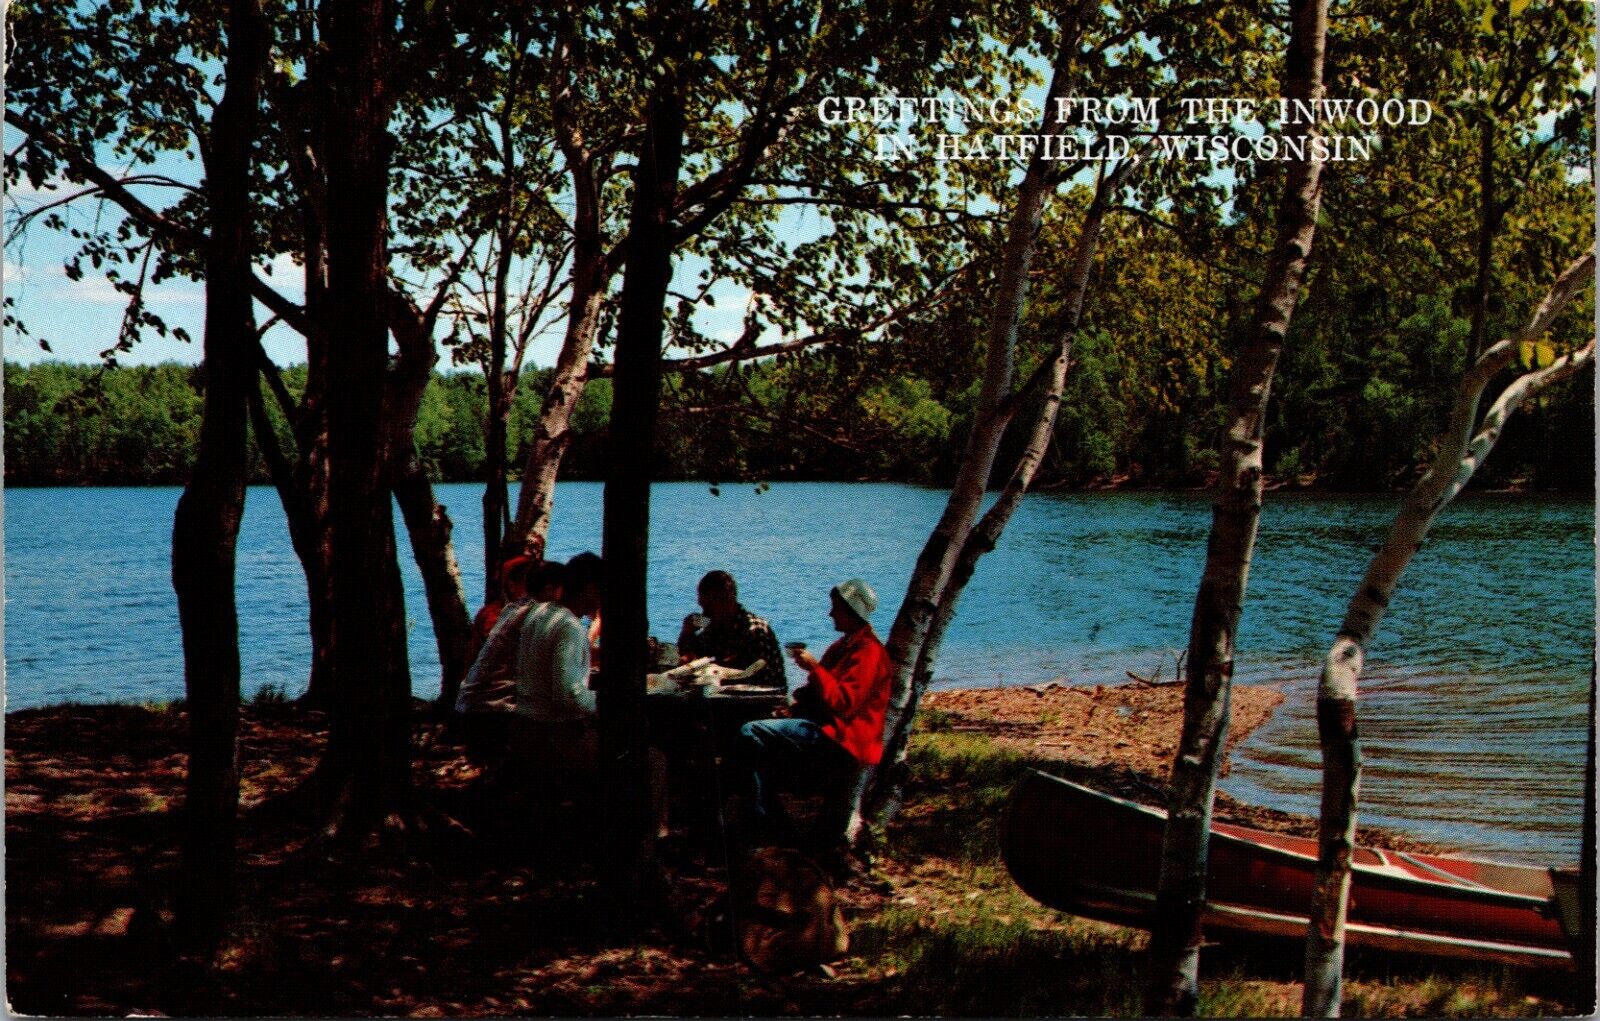 Hatfield Wisconsin WI People At Picnic Table Next To Lake Postcard